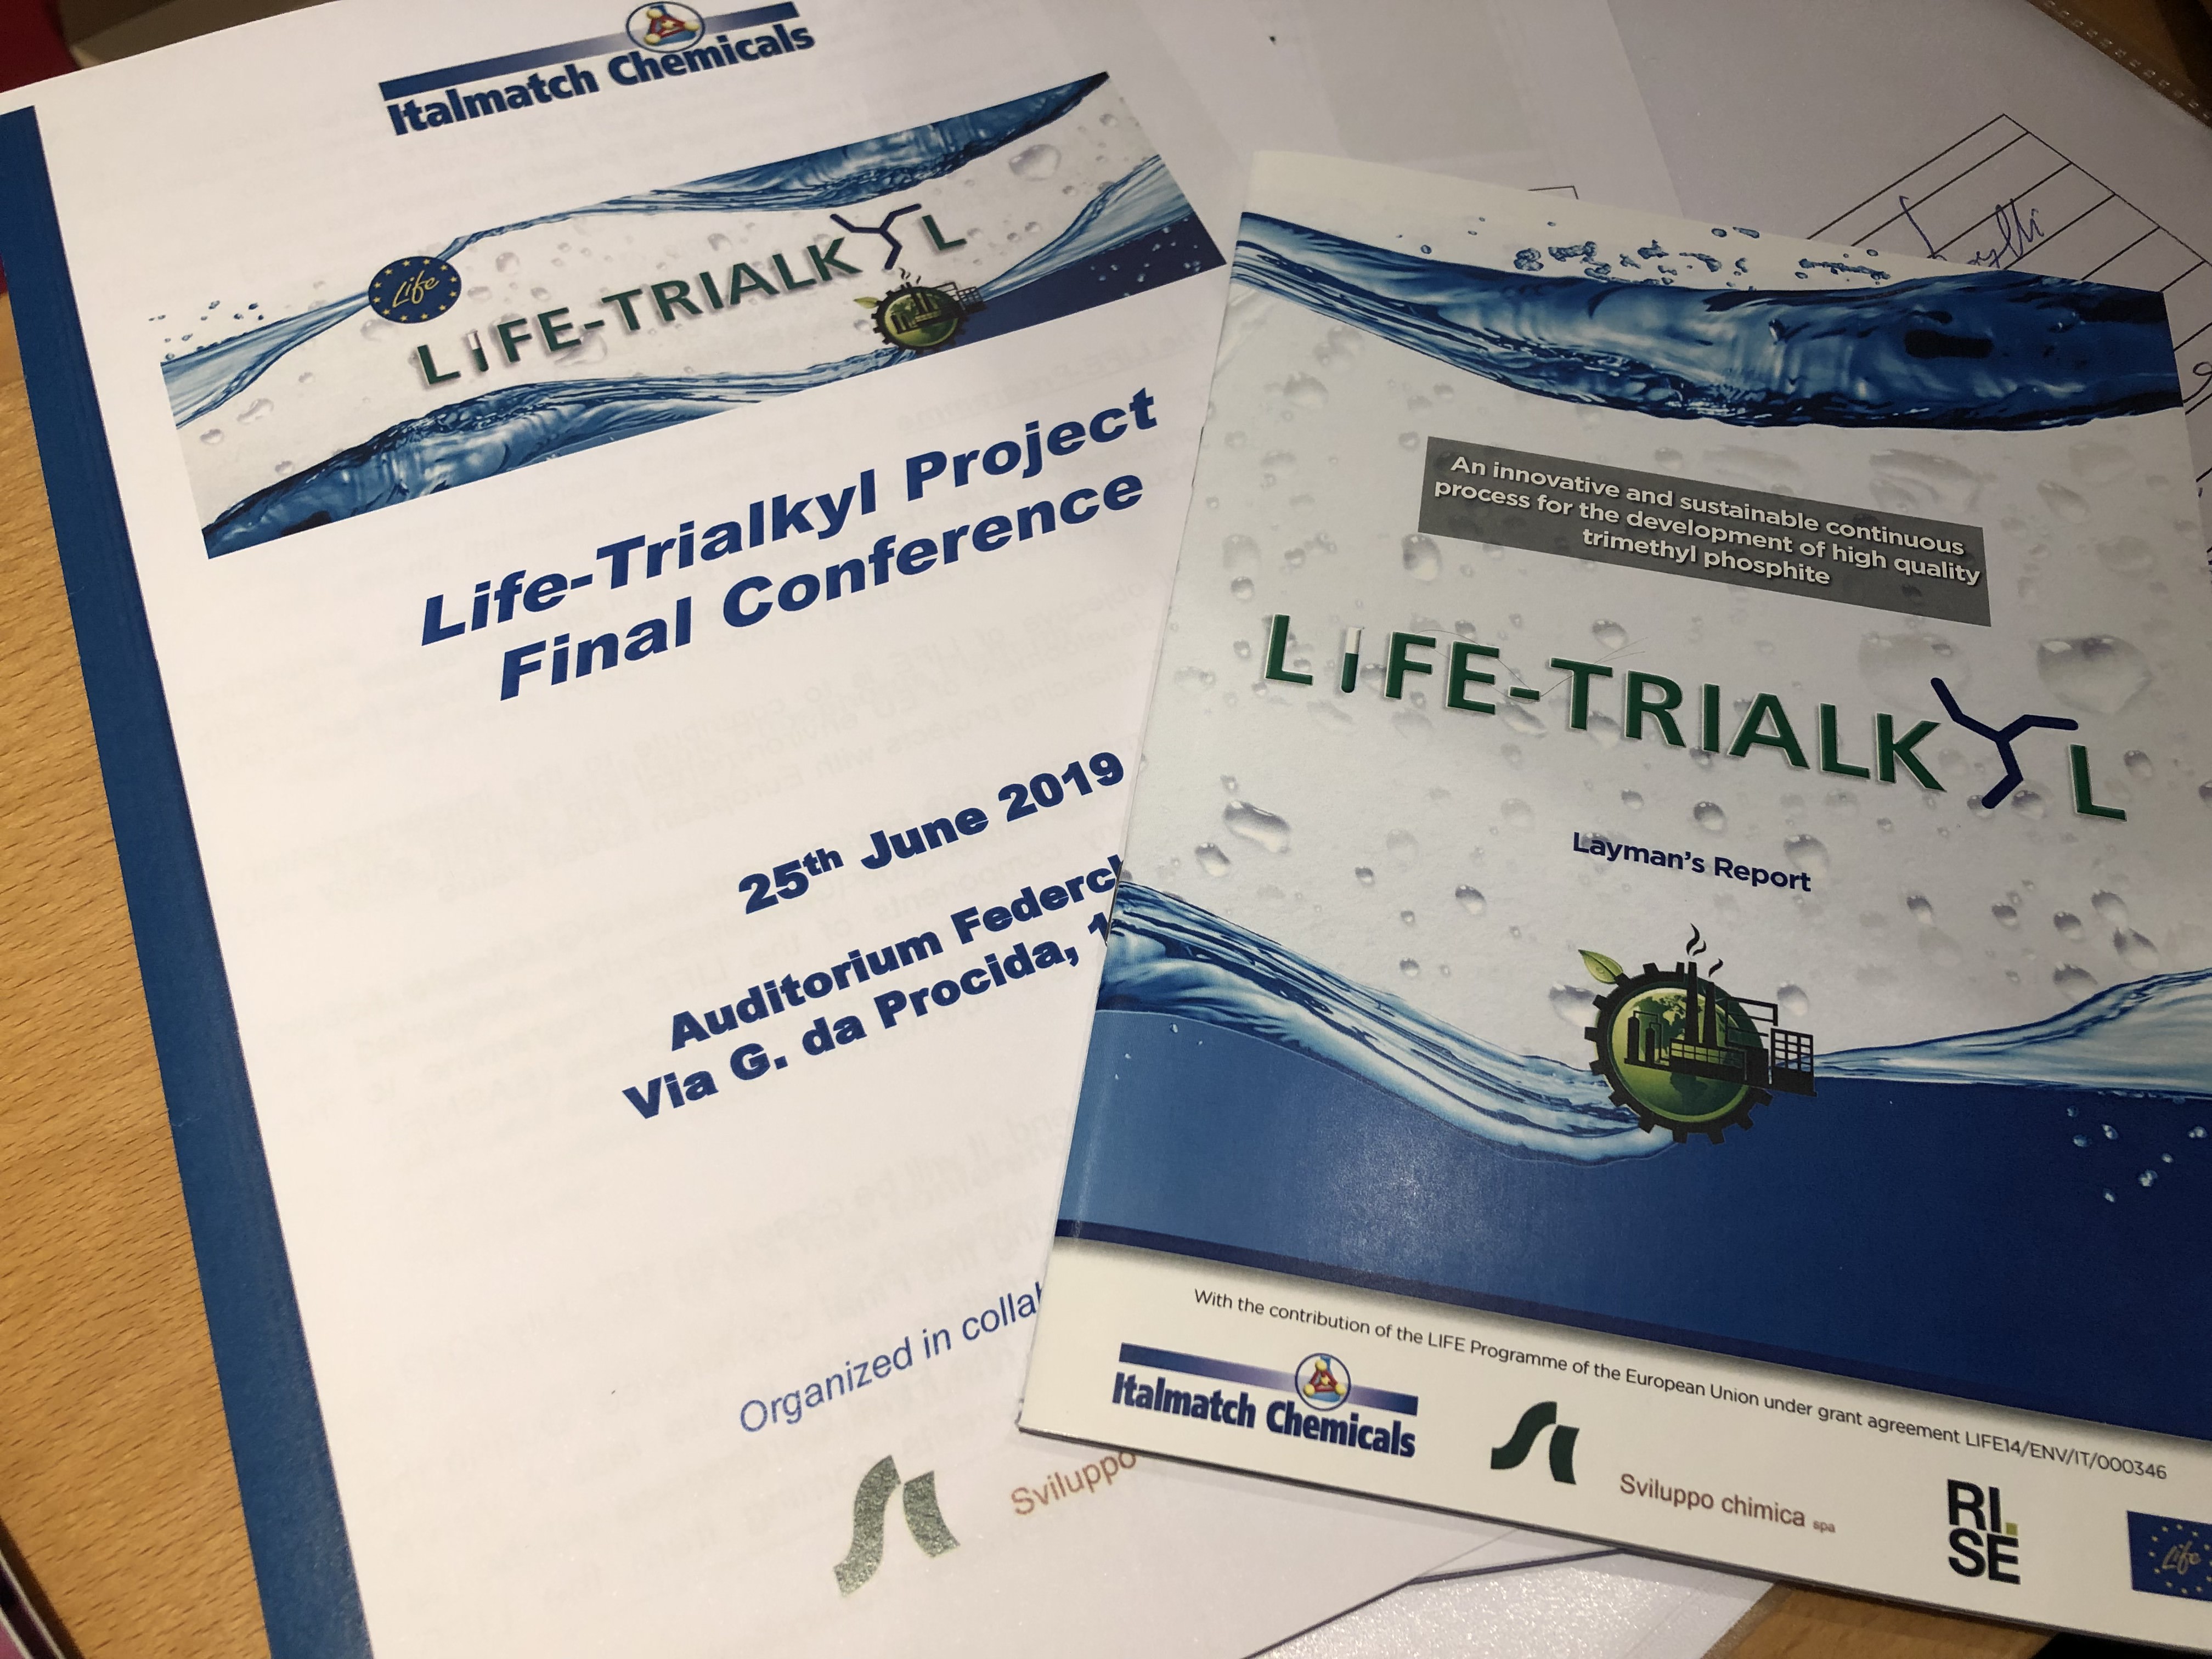 LIFE-Trialkyl Final Conference (14)